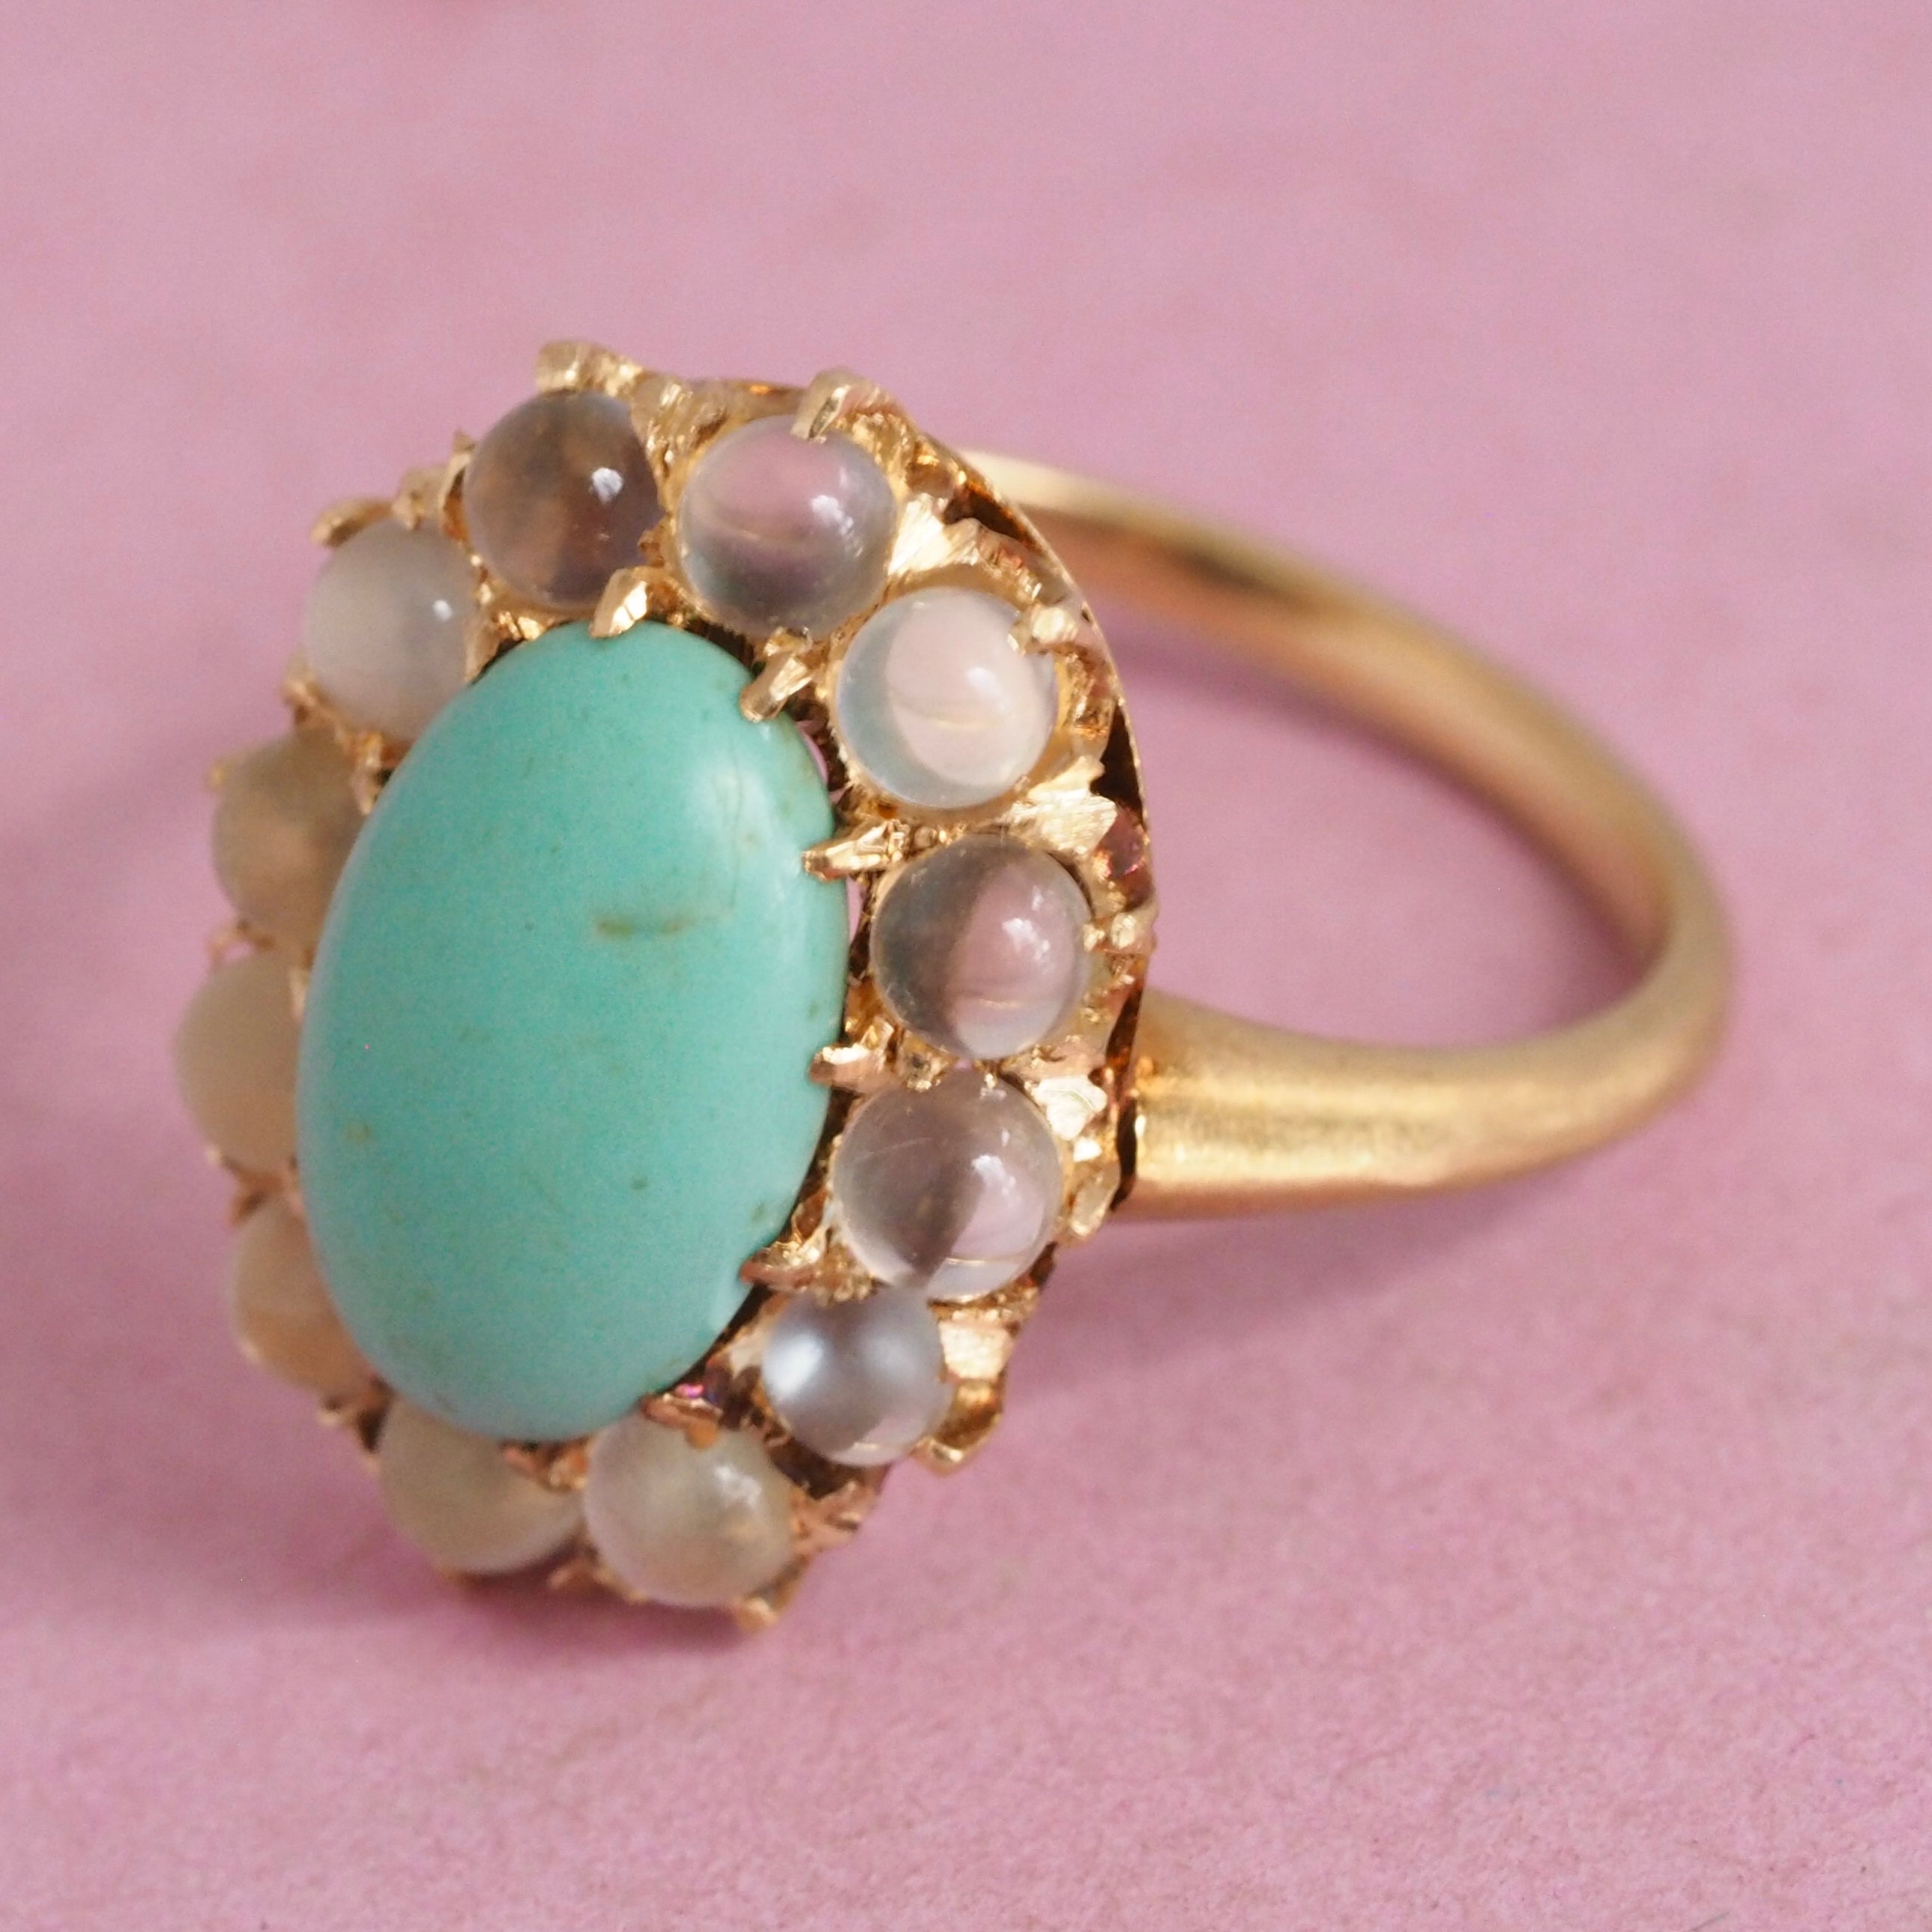 Antique Victorian 18k Gold Turquoise and Moonstone Halo Ring